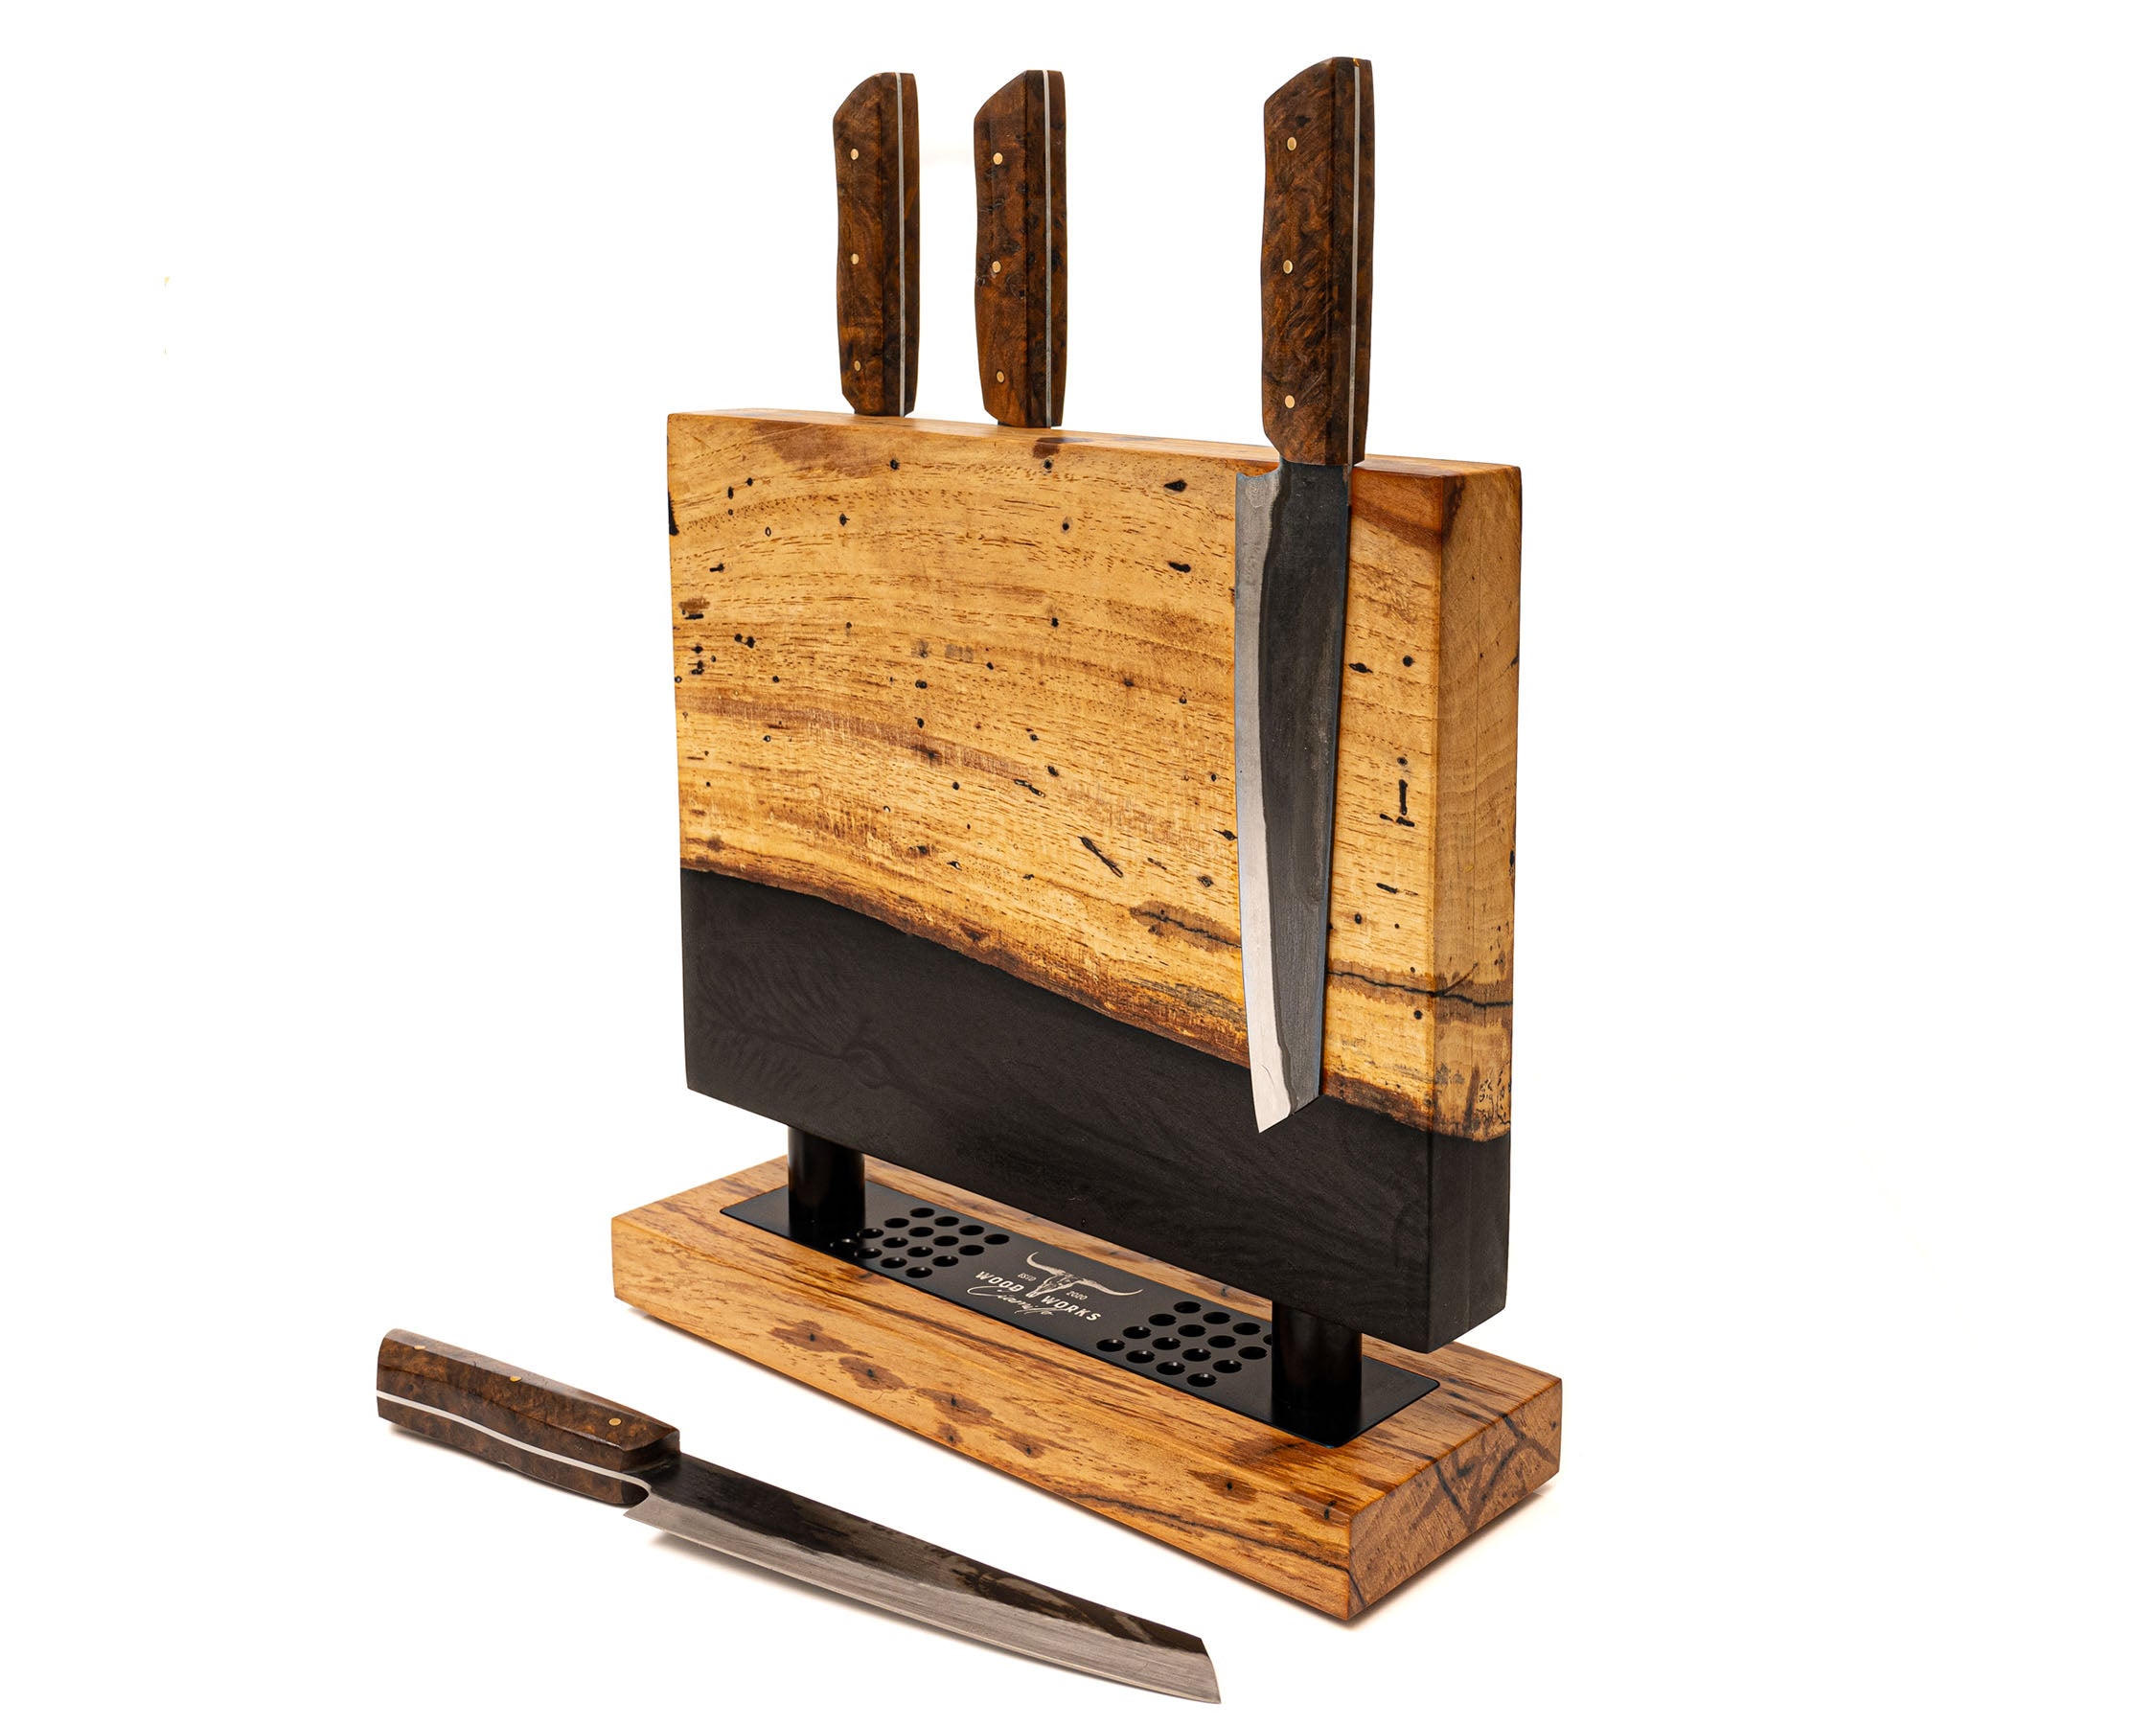 PE5 Pecan and Epoxy Resin Magnetic Knife Block (You Receive the Knife Block Shown)